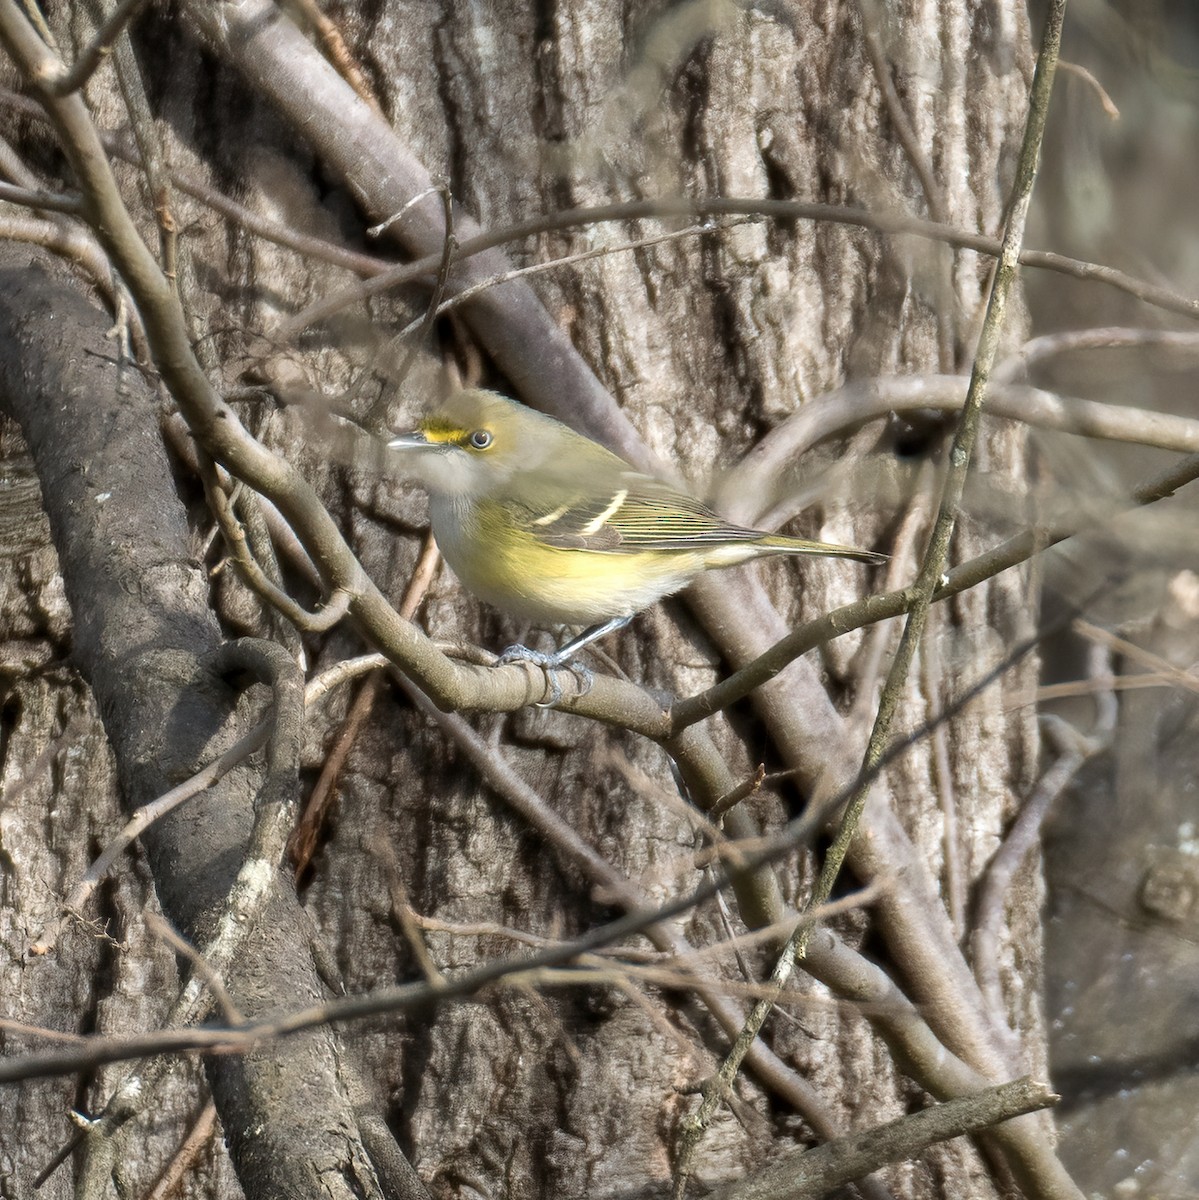 White-eyed Vireo - jerry amerson